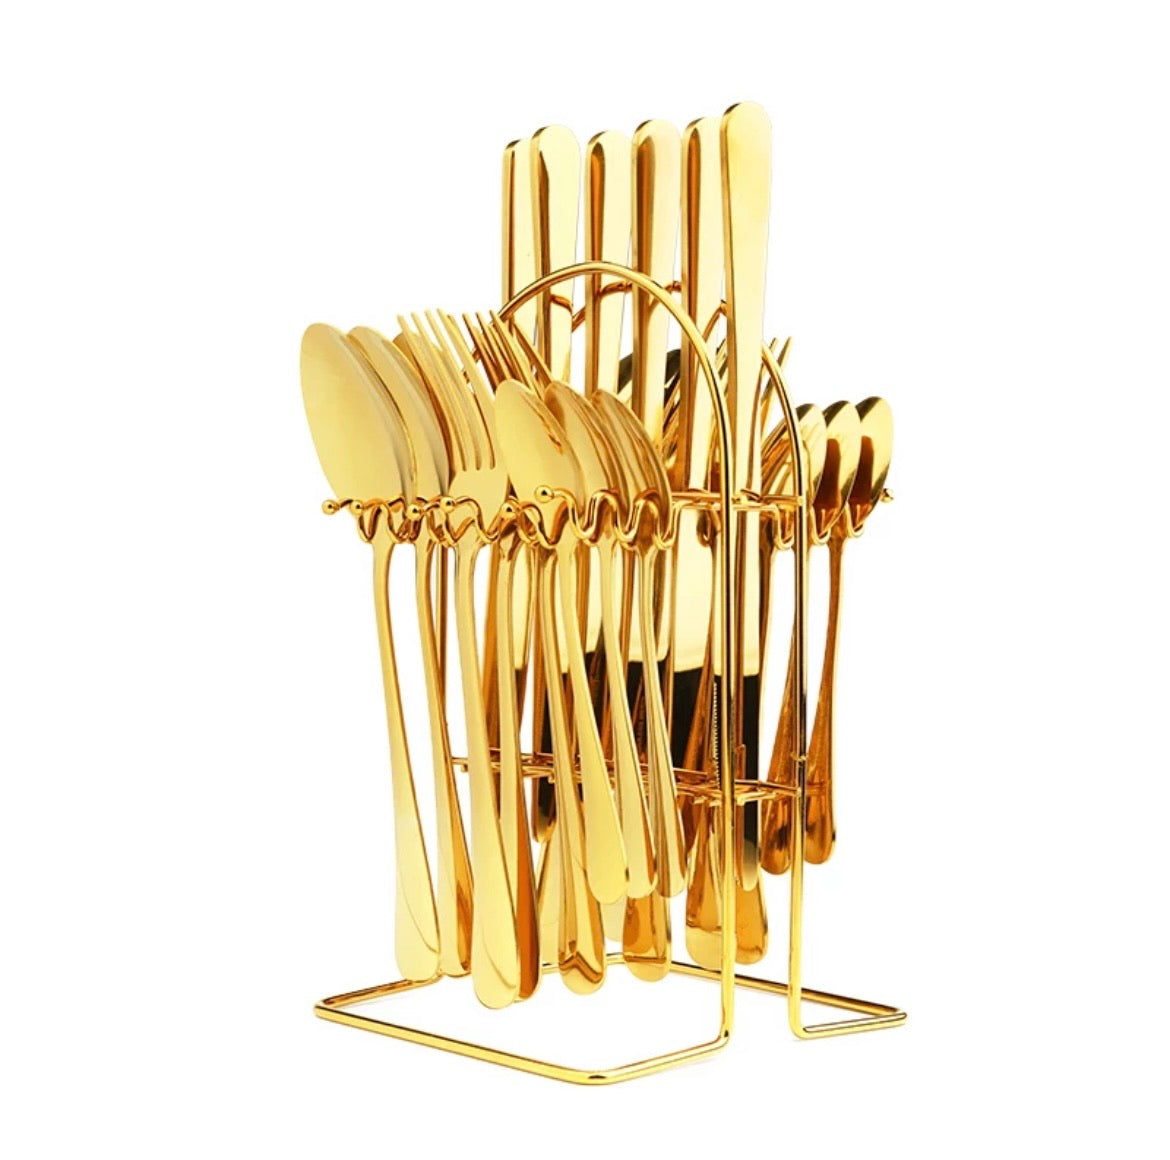 Hanging Gold Premium Stainless Steel Cutlery Set